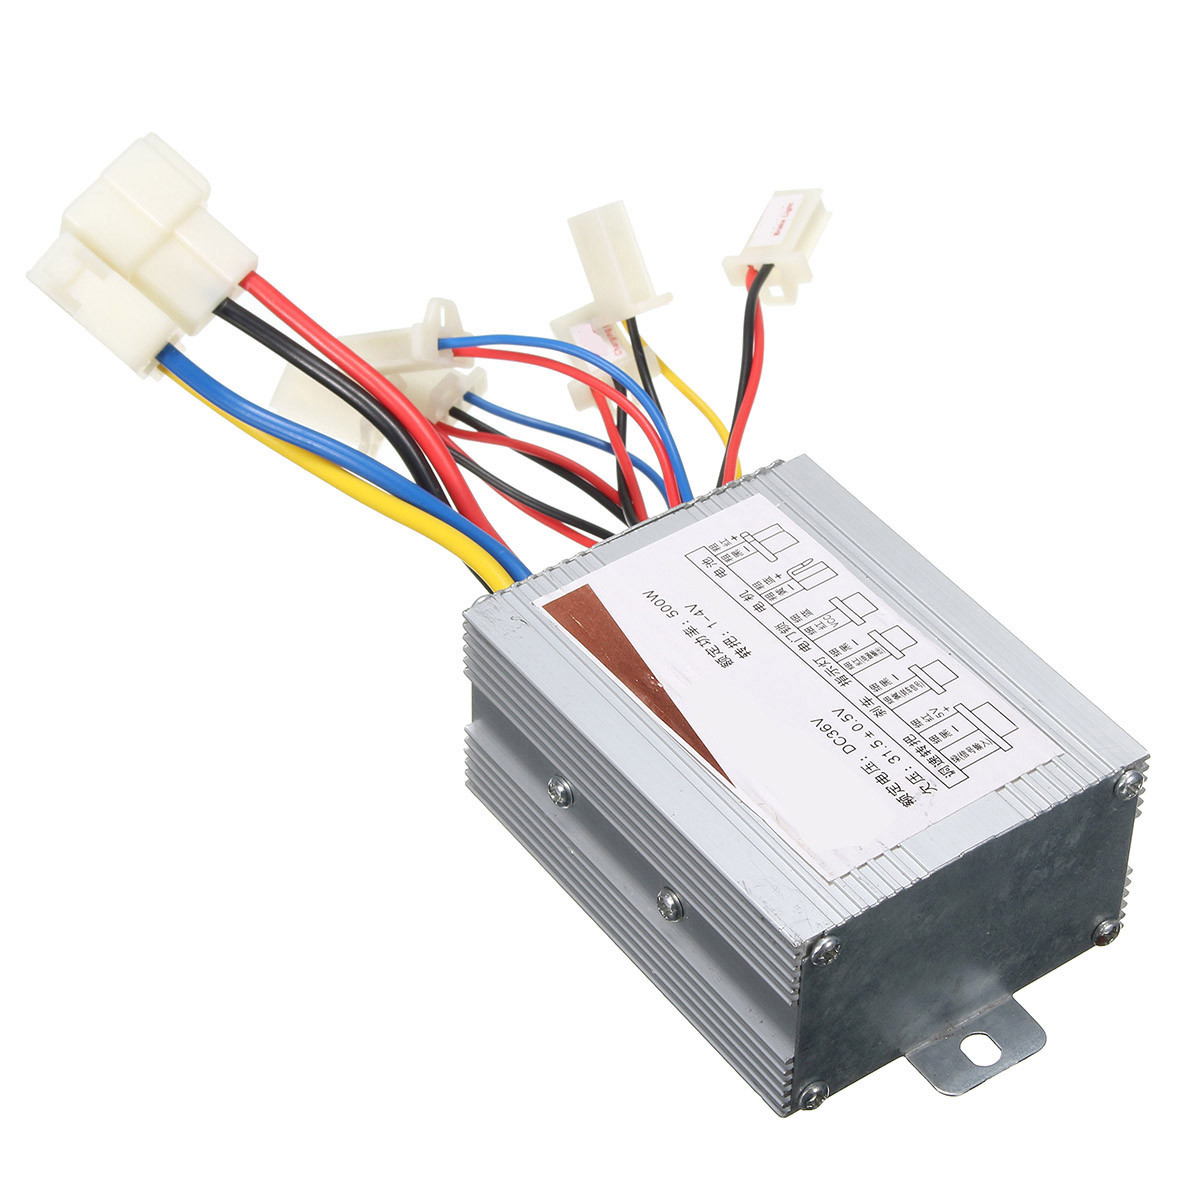 36V-500W-Motor-Brush-Speed-Controller-For-Electric-Bike-Bicycle-Scooter-1107236